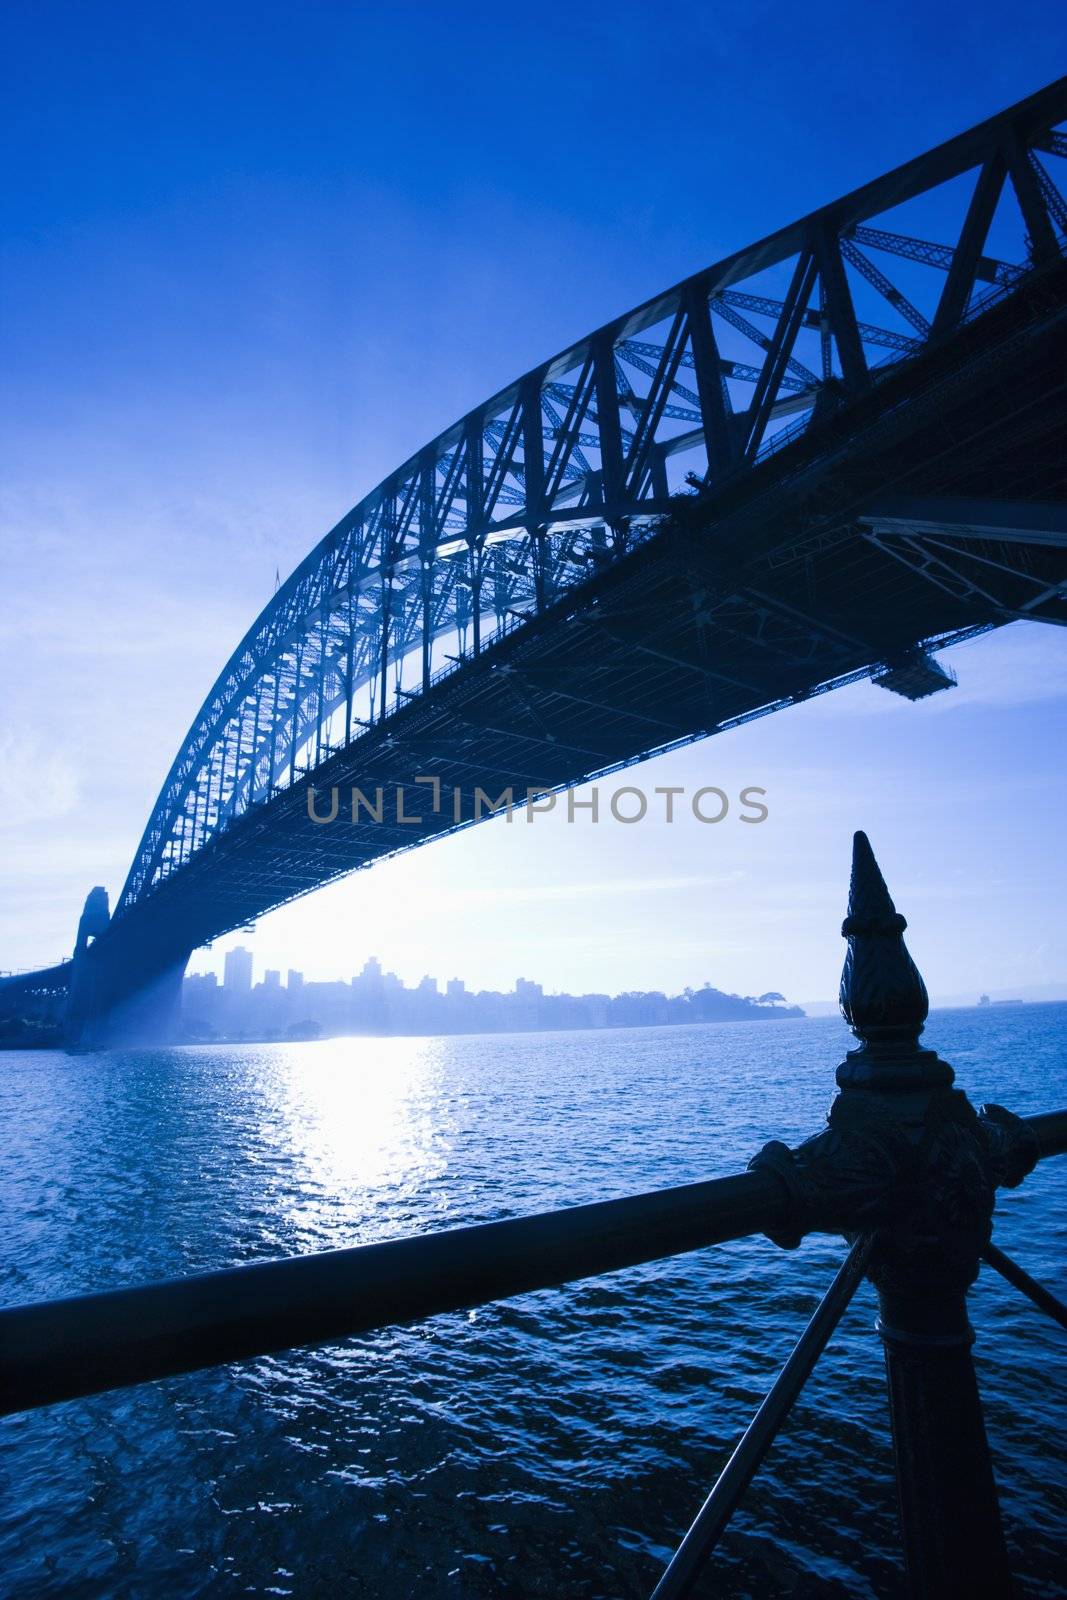 Low angle view of Sydney Harbour Bridge at dusk with harbour and distant Sydney skyline, Australia.